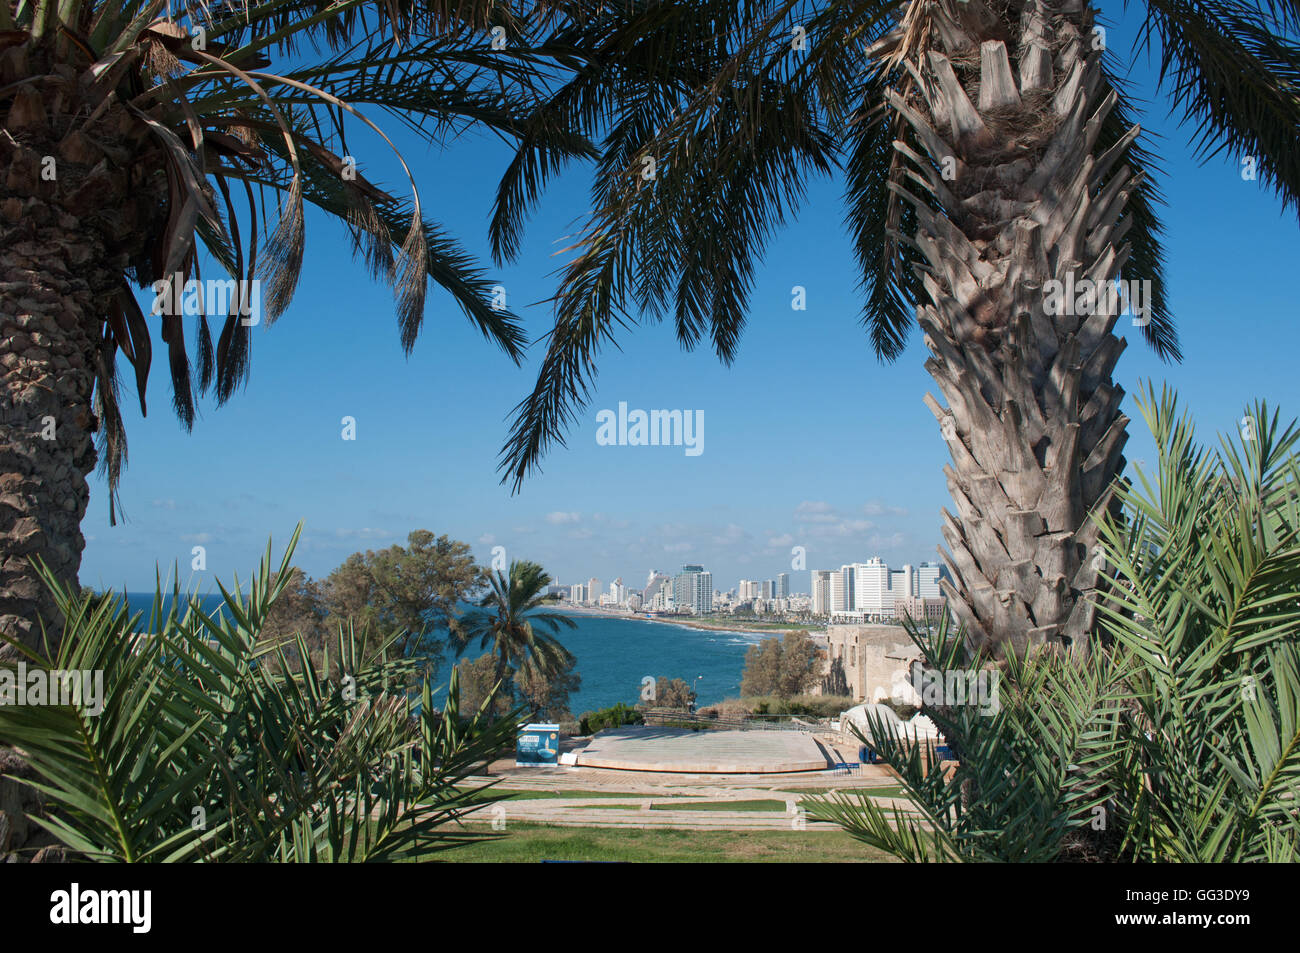 Israel, Middle East: the skyline and the shoreline of the beaches of Tel Aviv seen from the top of the hill on which the Old City of Jaffa is perched Stock Photo